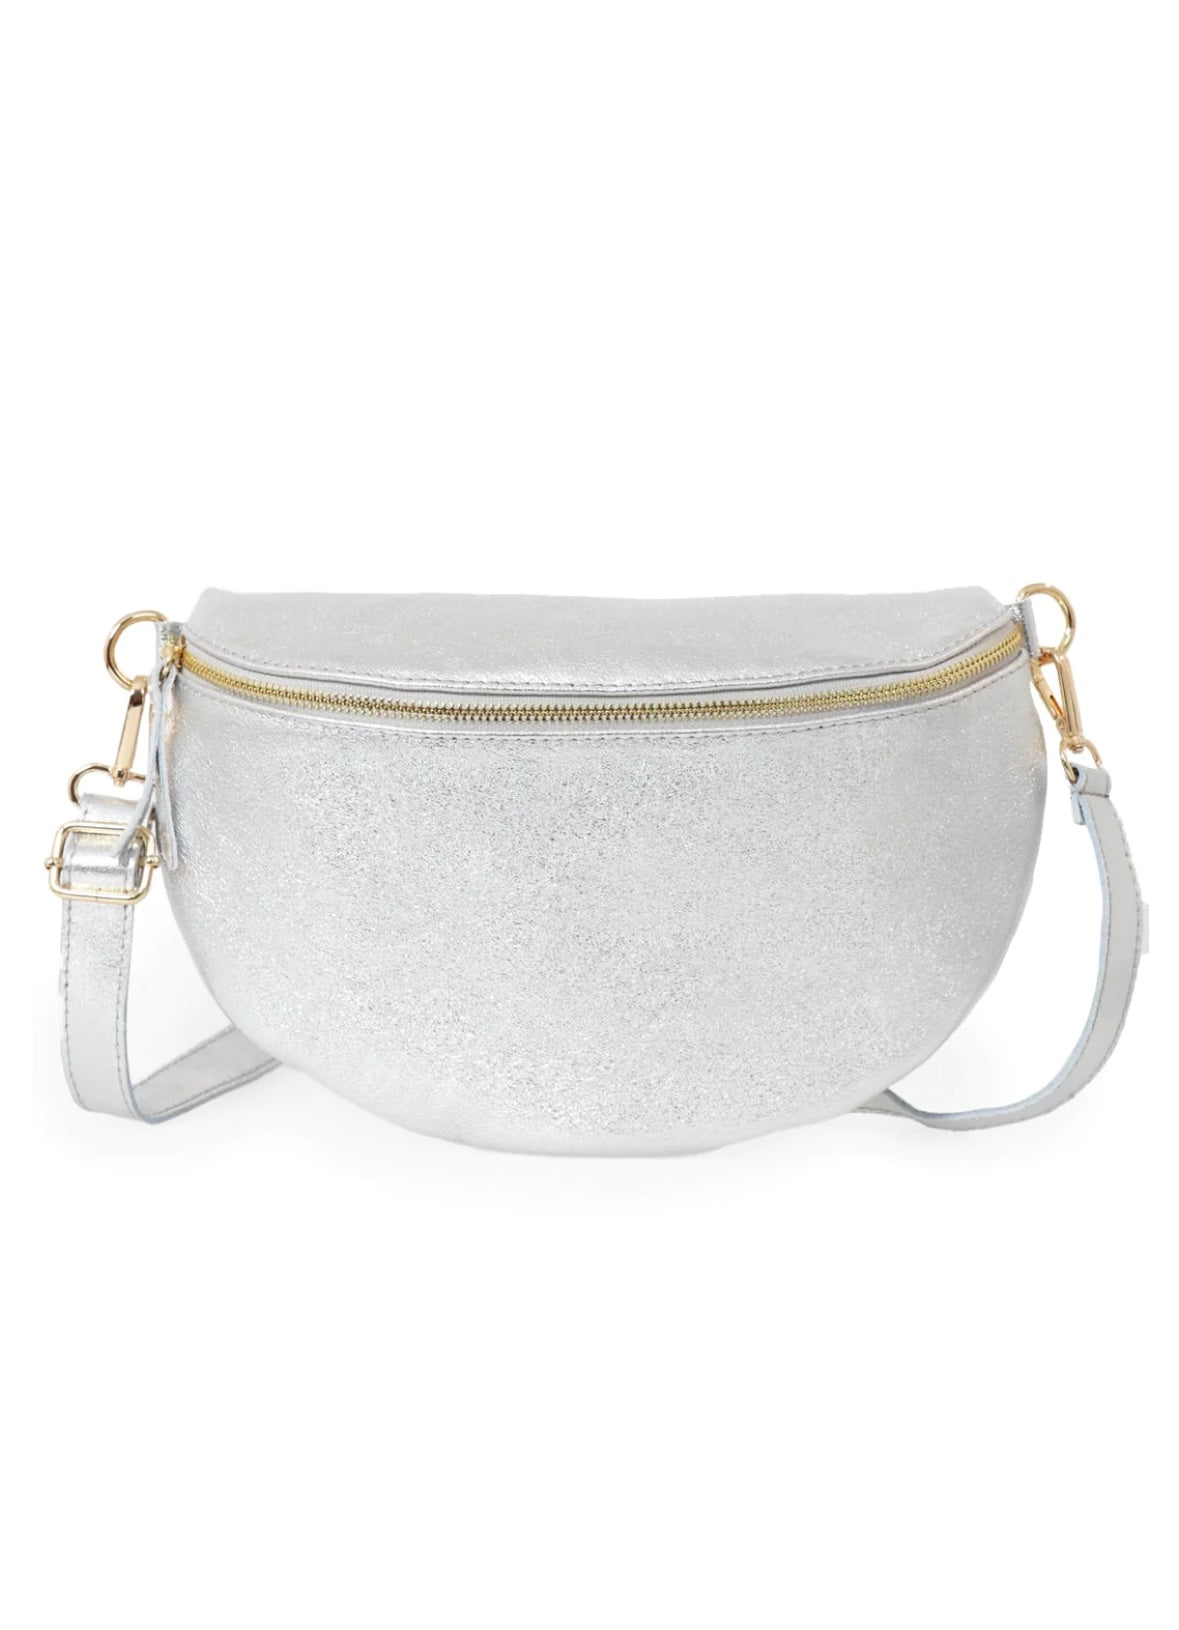 Large Silver Italian Leather Sling Bag